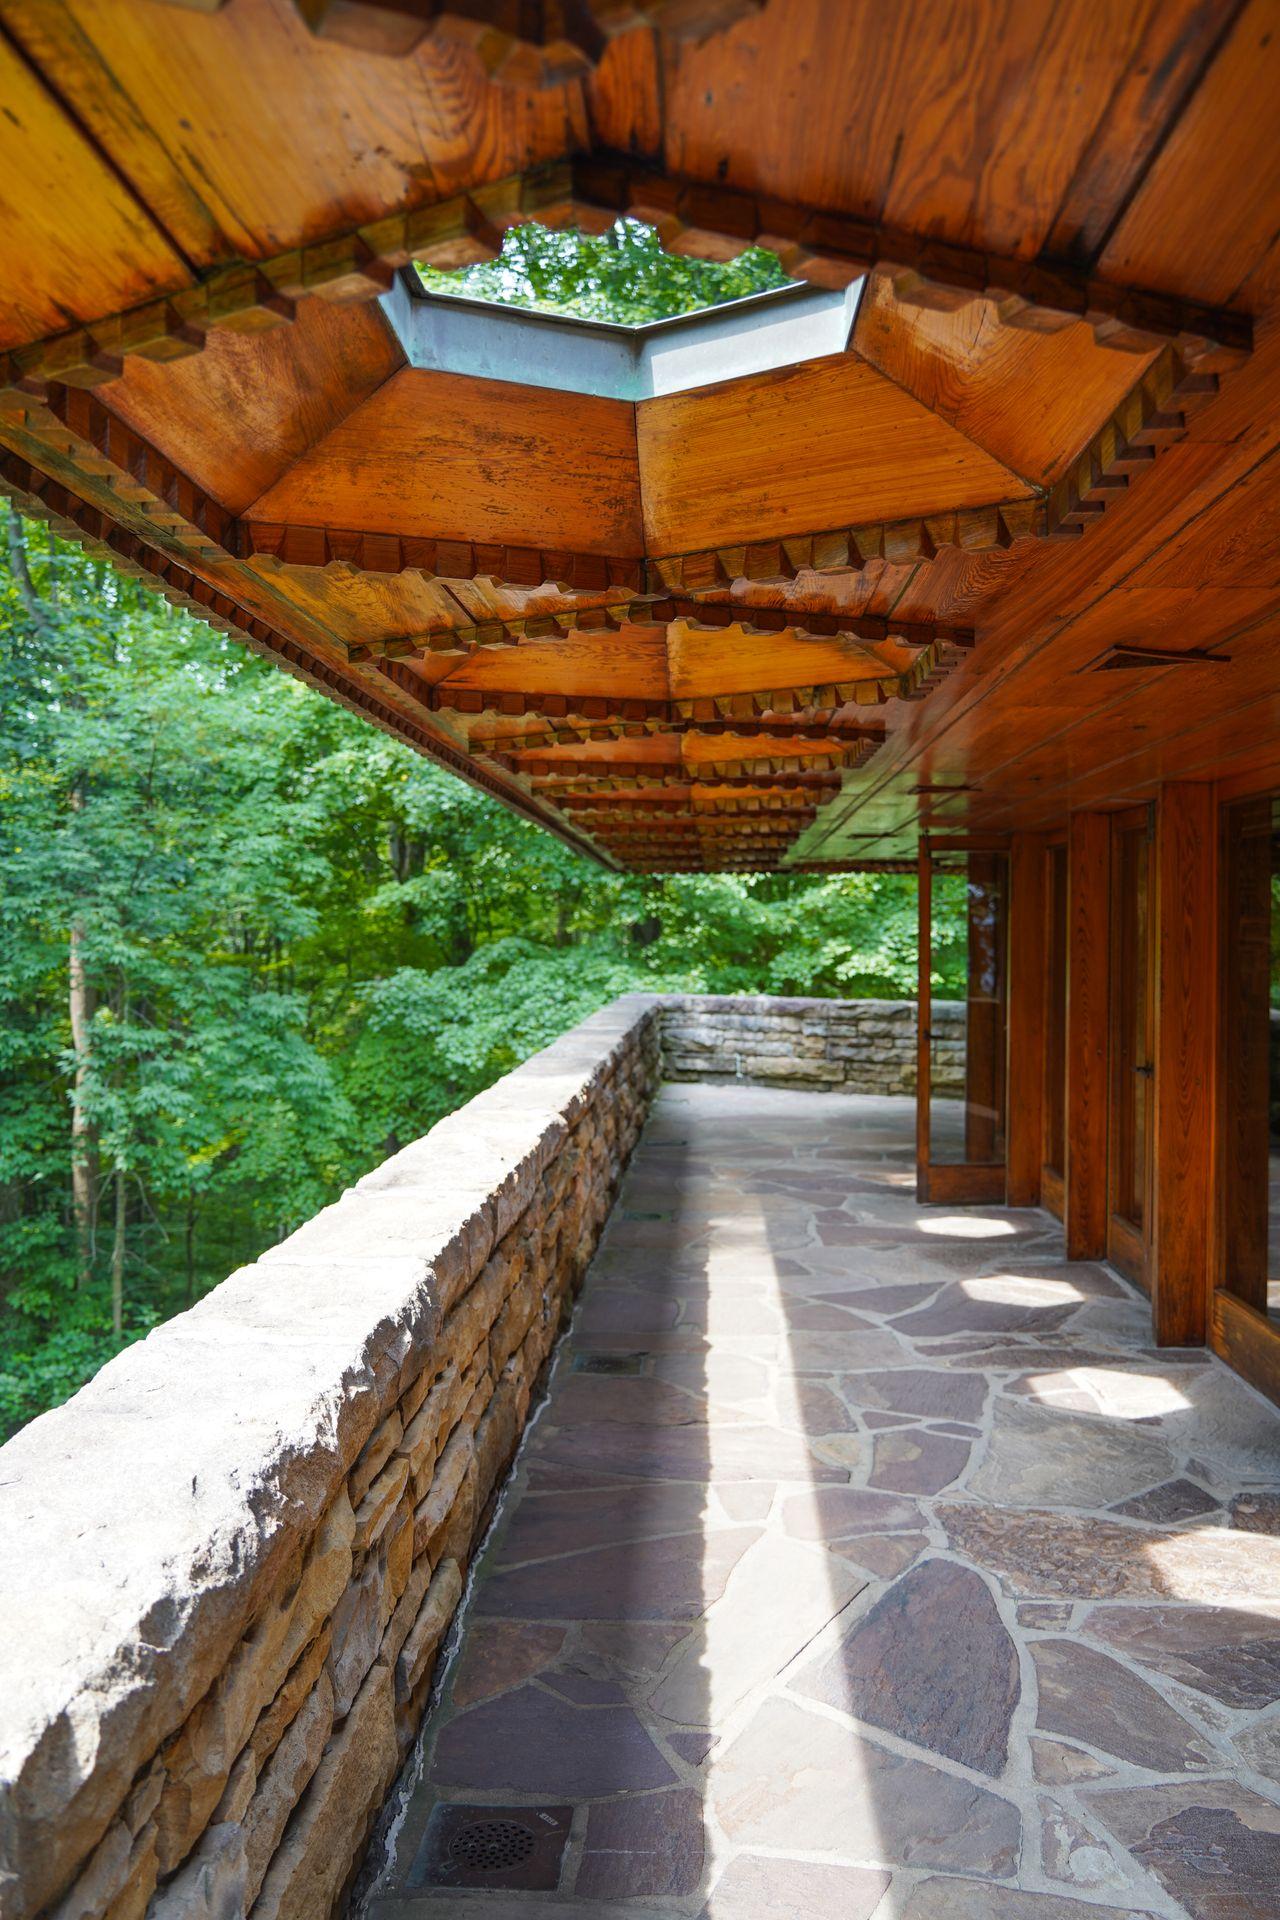 The outdoor balcony at Kentuck Knob. There is a stone walkway and a brown roof area with hexagon shapes letting in light.